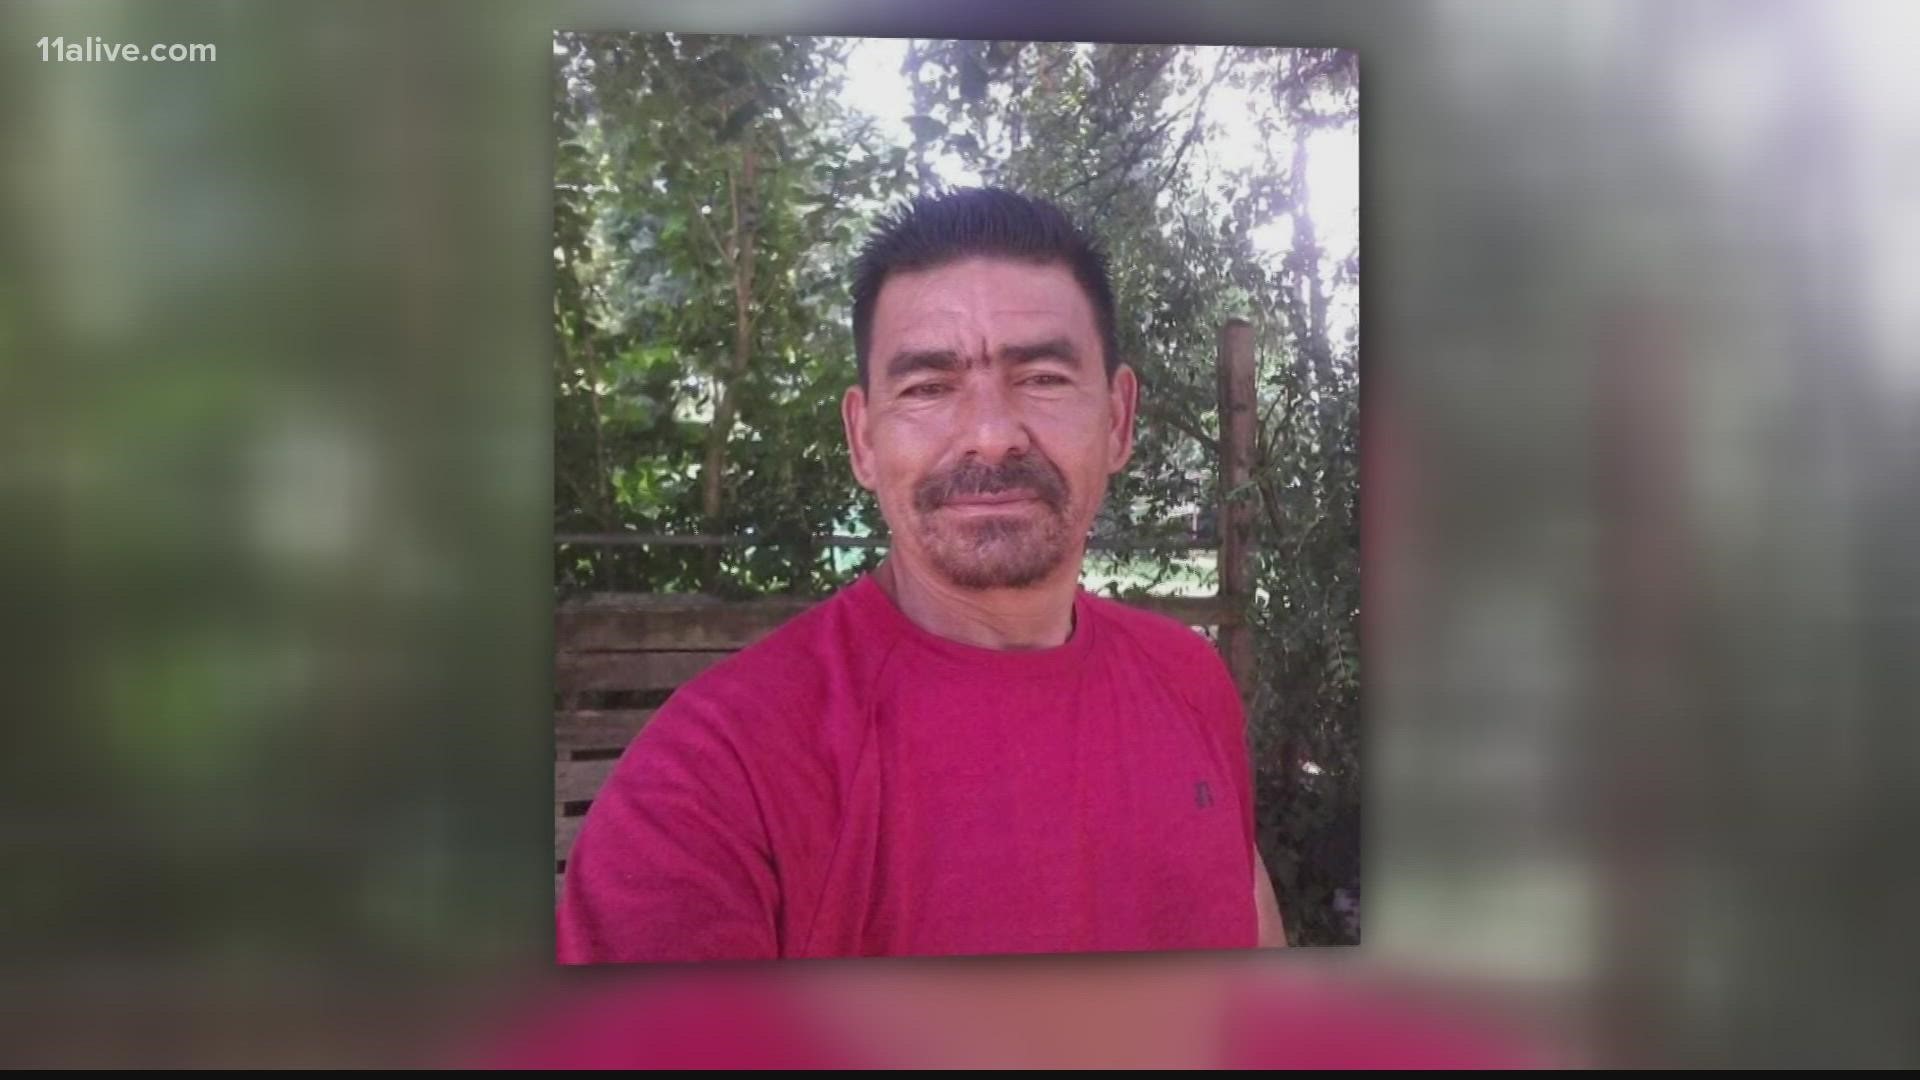 Julio Sandoval leaves behind 5 children, 10 siblings and his parents.